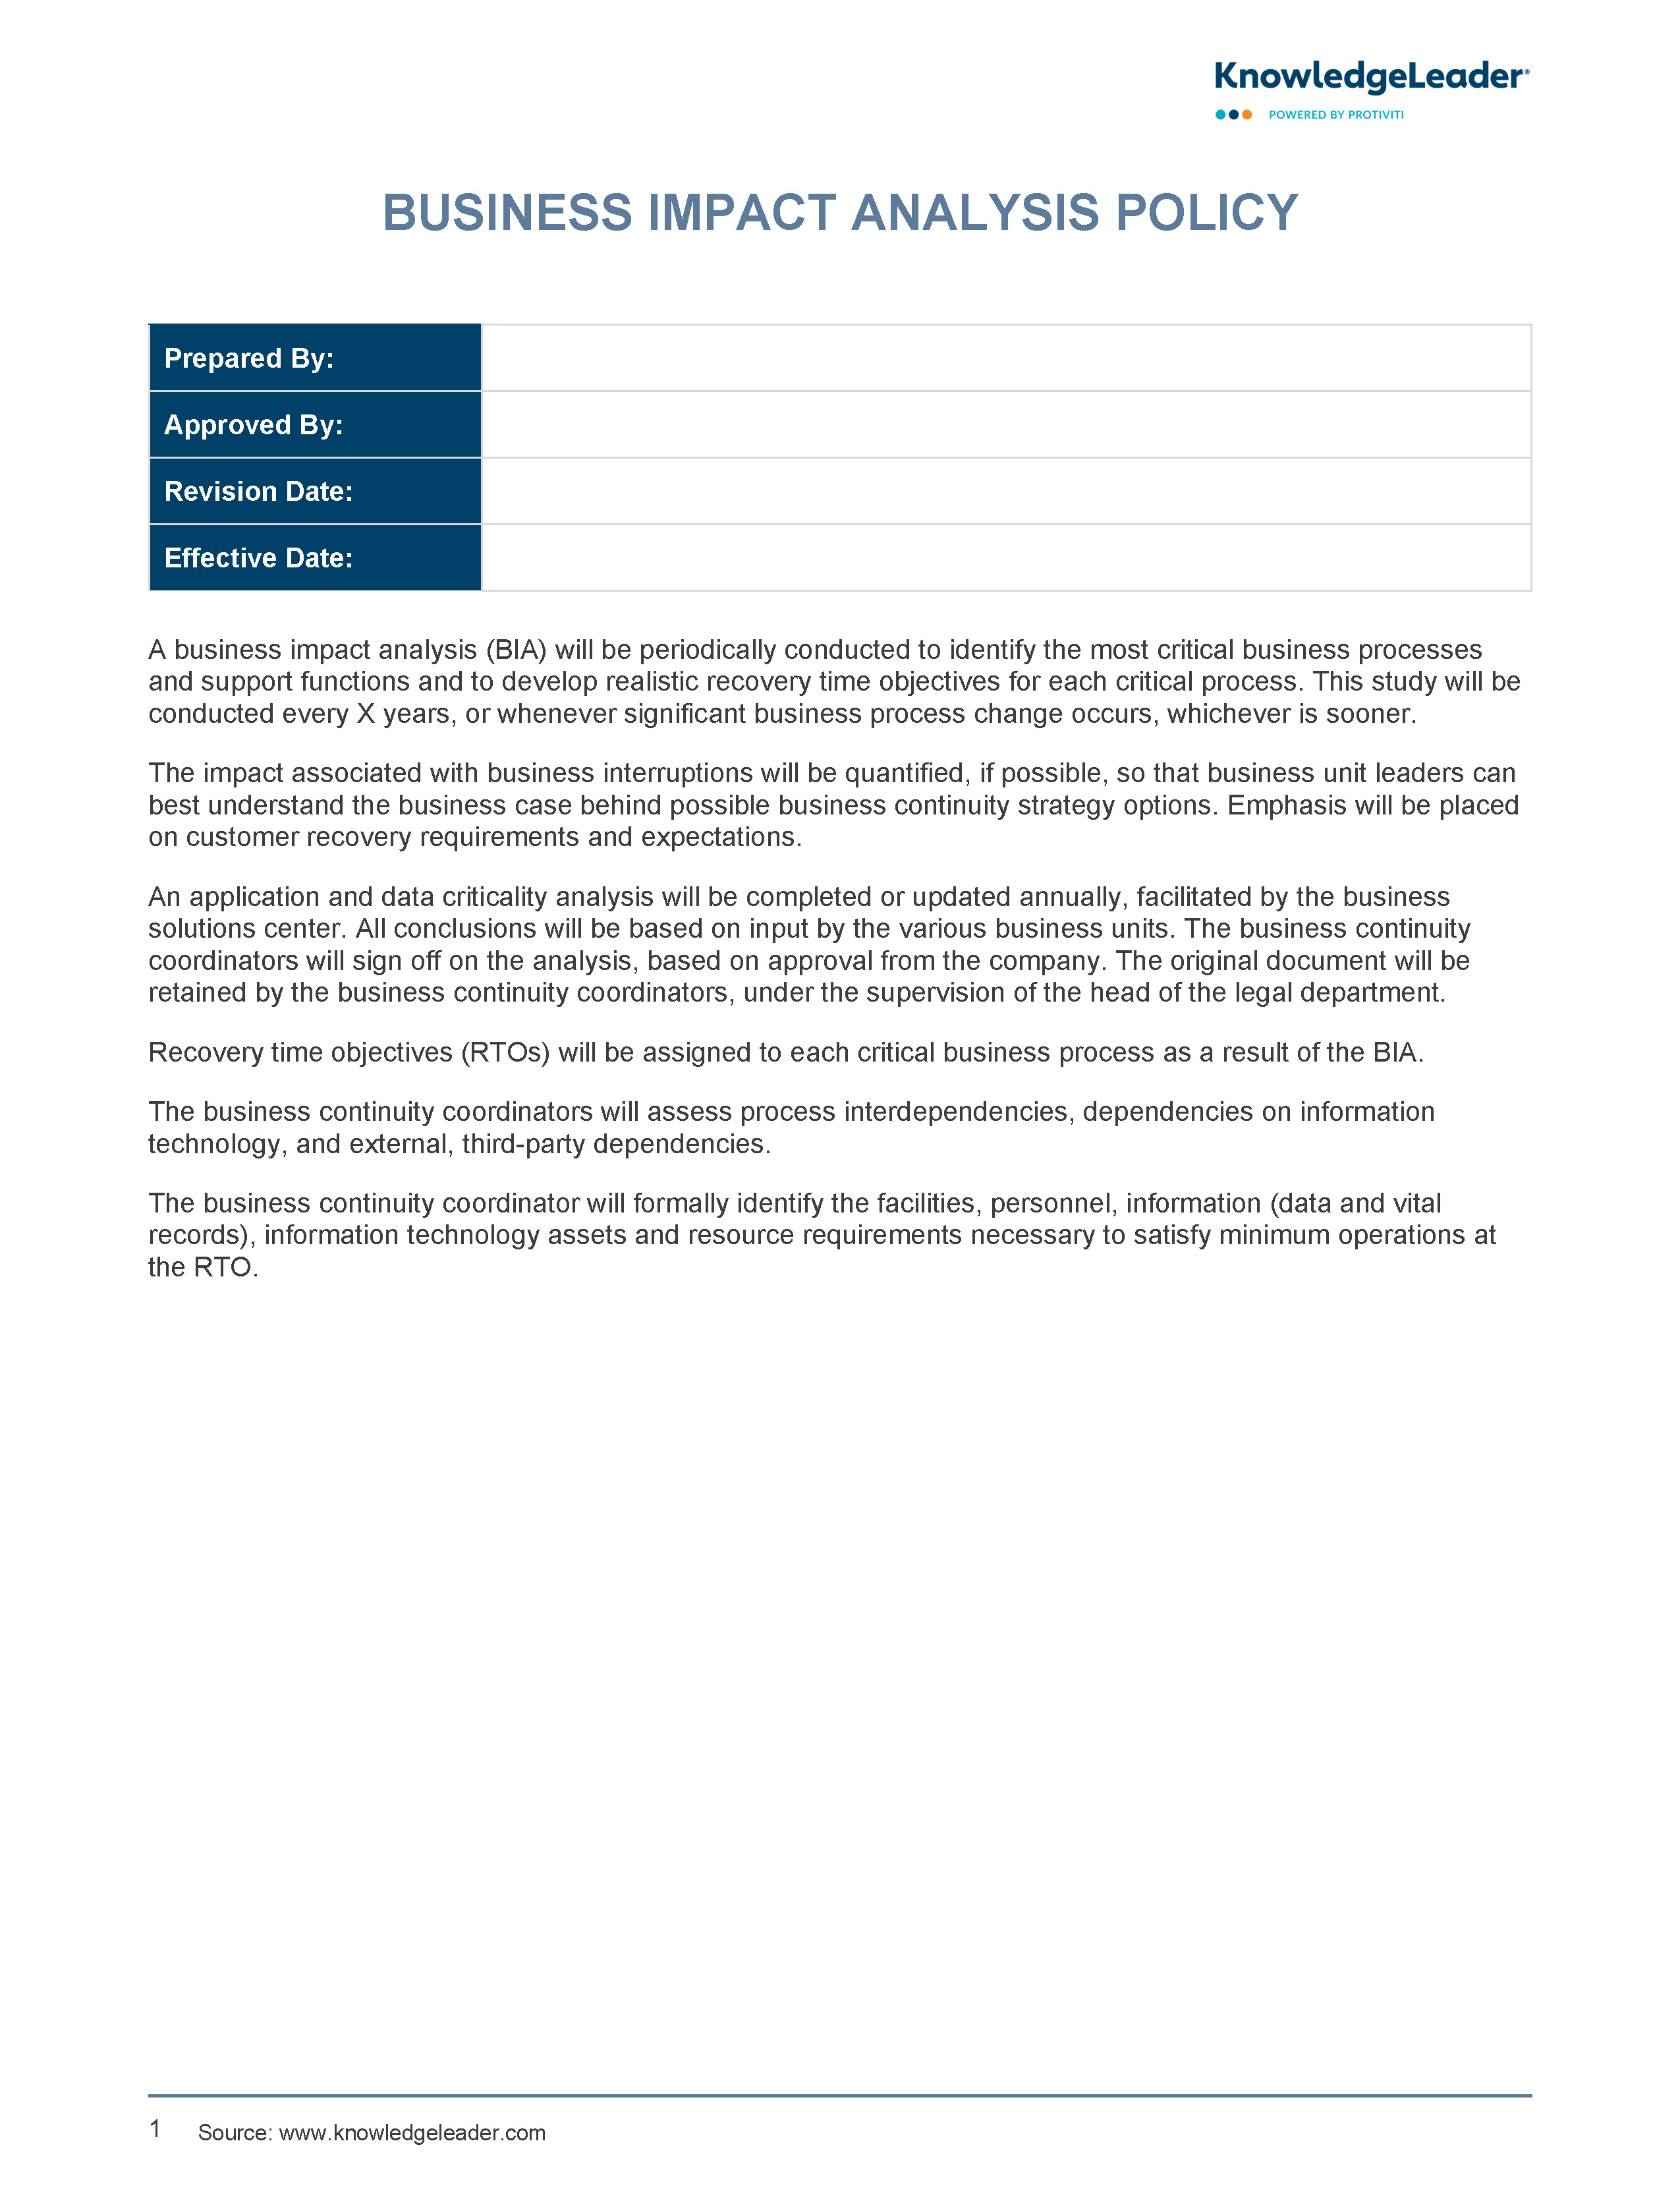 Screenshot of the first page of Business Impact Analysis Policy